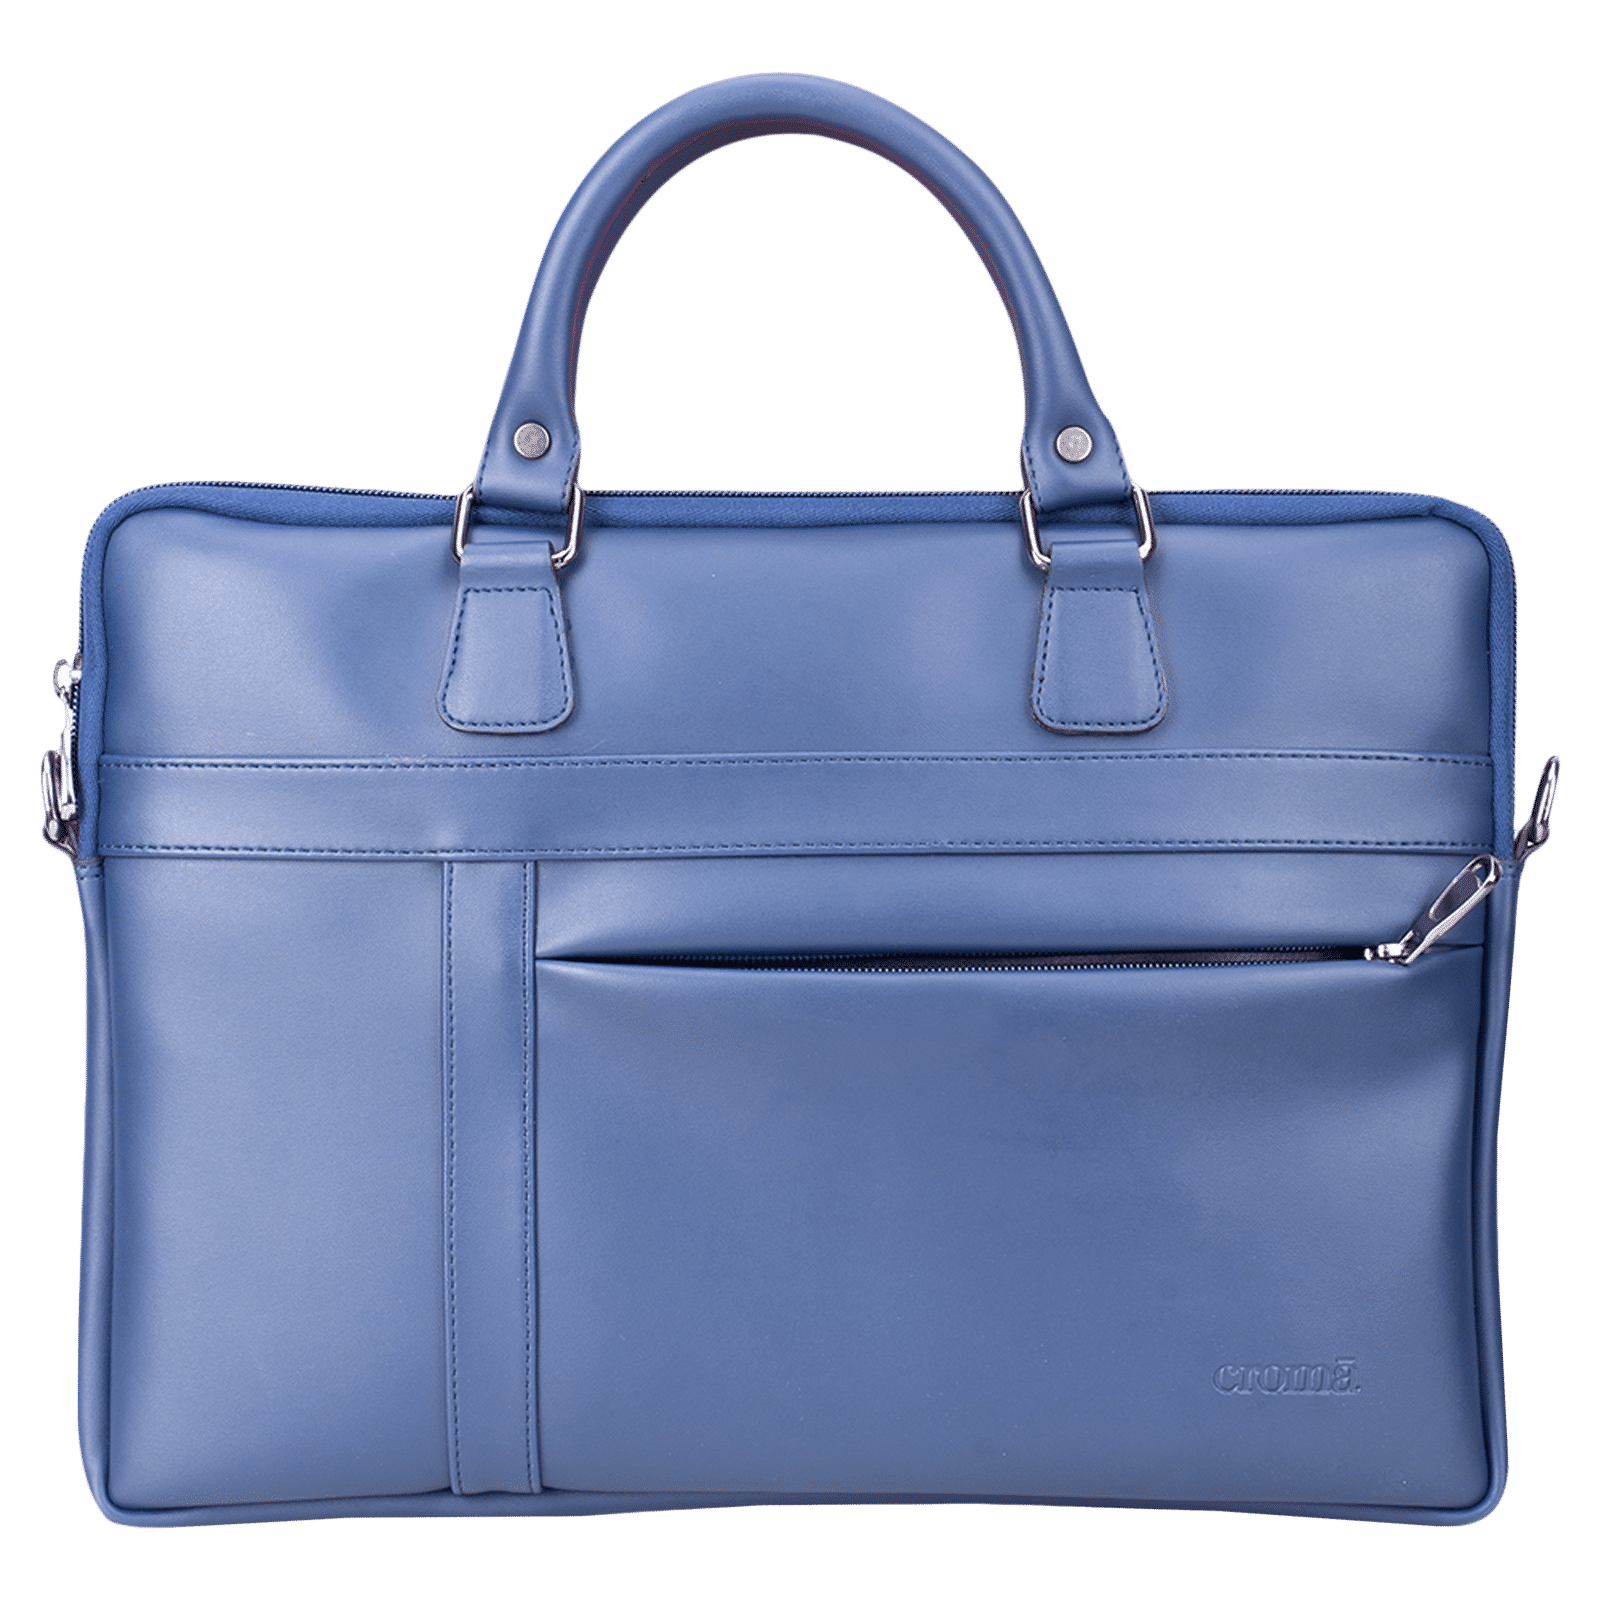 Laptop Bags - Buy Laptop Backpack Online at Best Prices in India| Croma